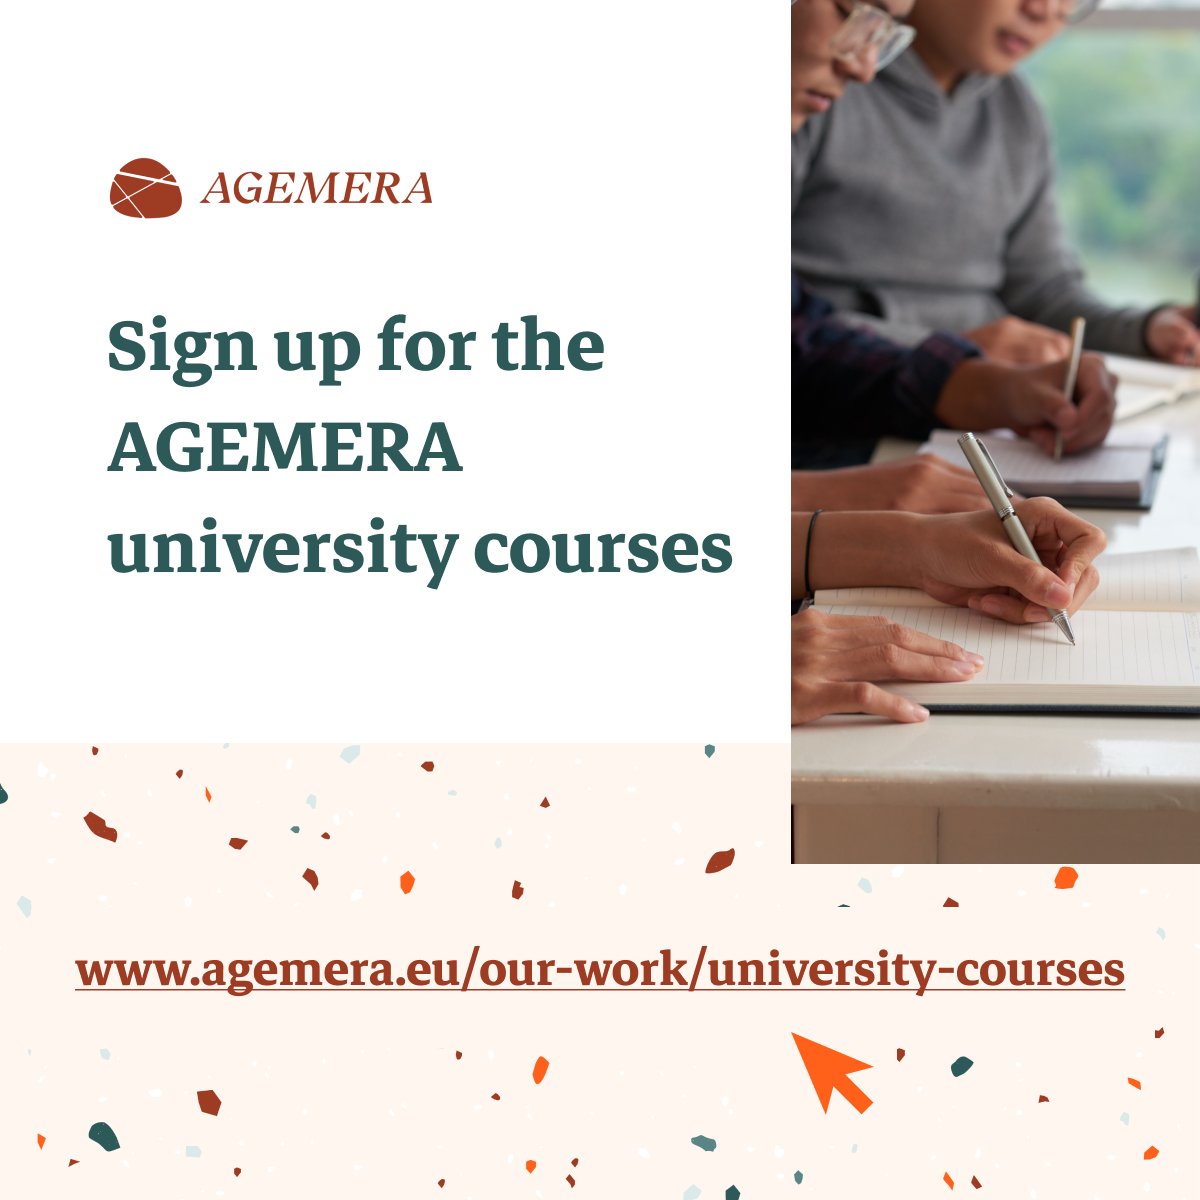 🥳 We launched our university courses! Spread the word! 🟠Focus: #CriticalRawMaterials in the #green and #digitaltransition 🟠 All specialisations welcome 🟠 Online courses, access to literature, tutors & top experts in the field! SIGN UP 👉 bit.ly/AGEMERA-courses